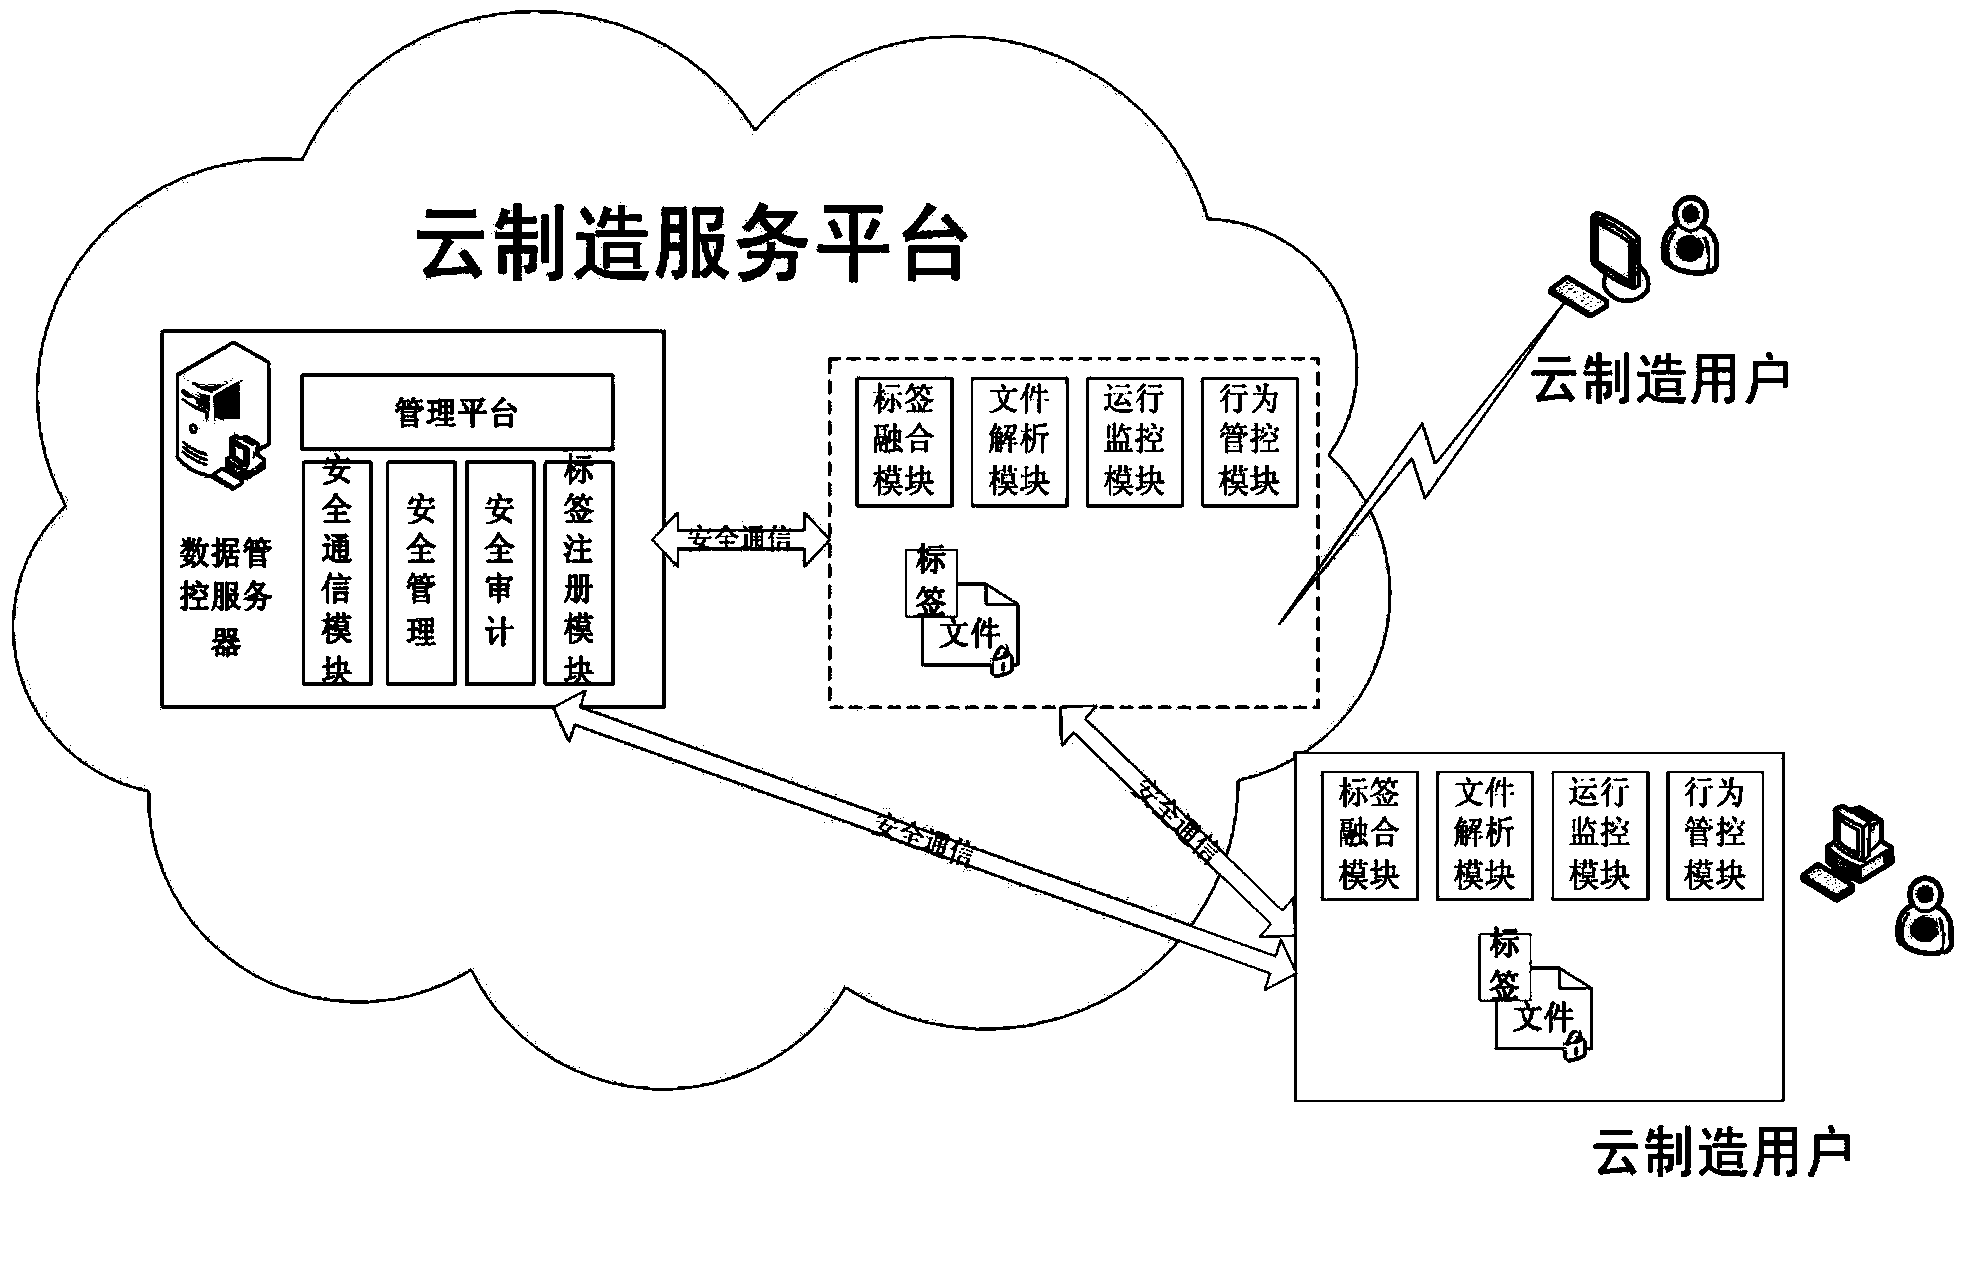 A cloud manufacturing user data management and control method based on labels